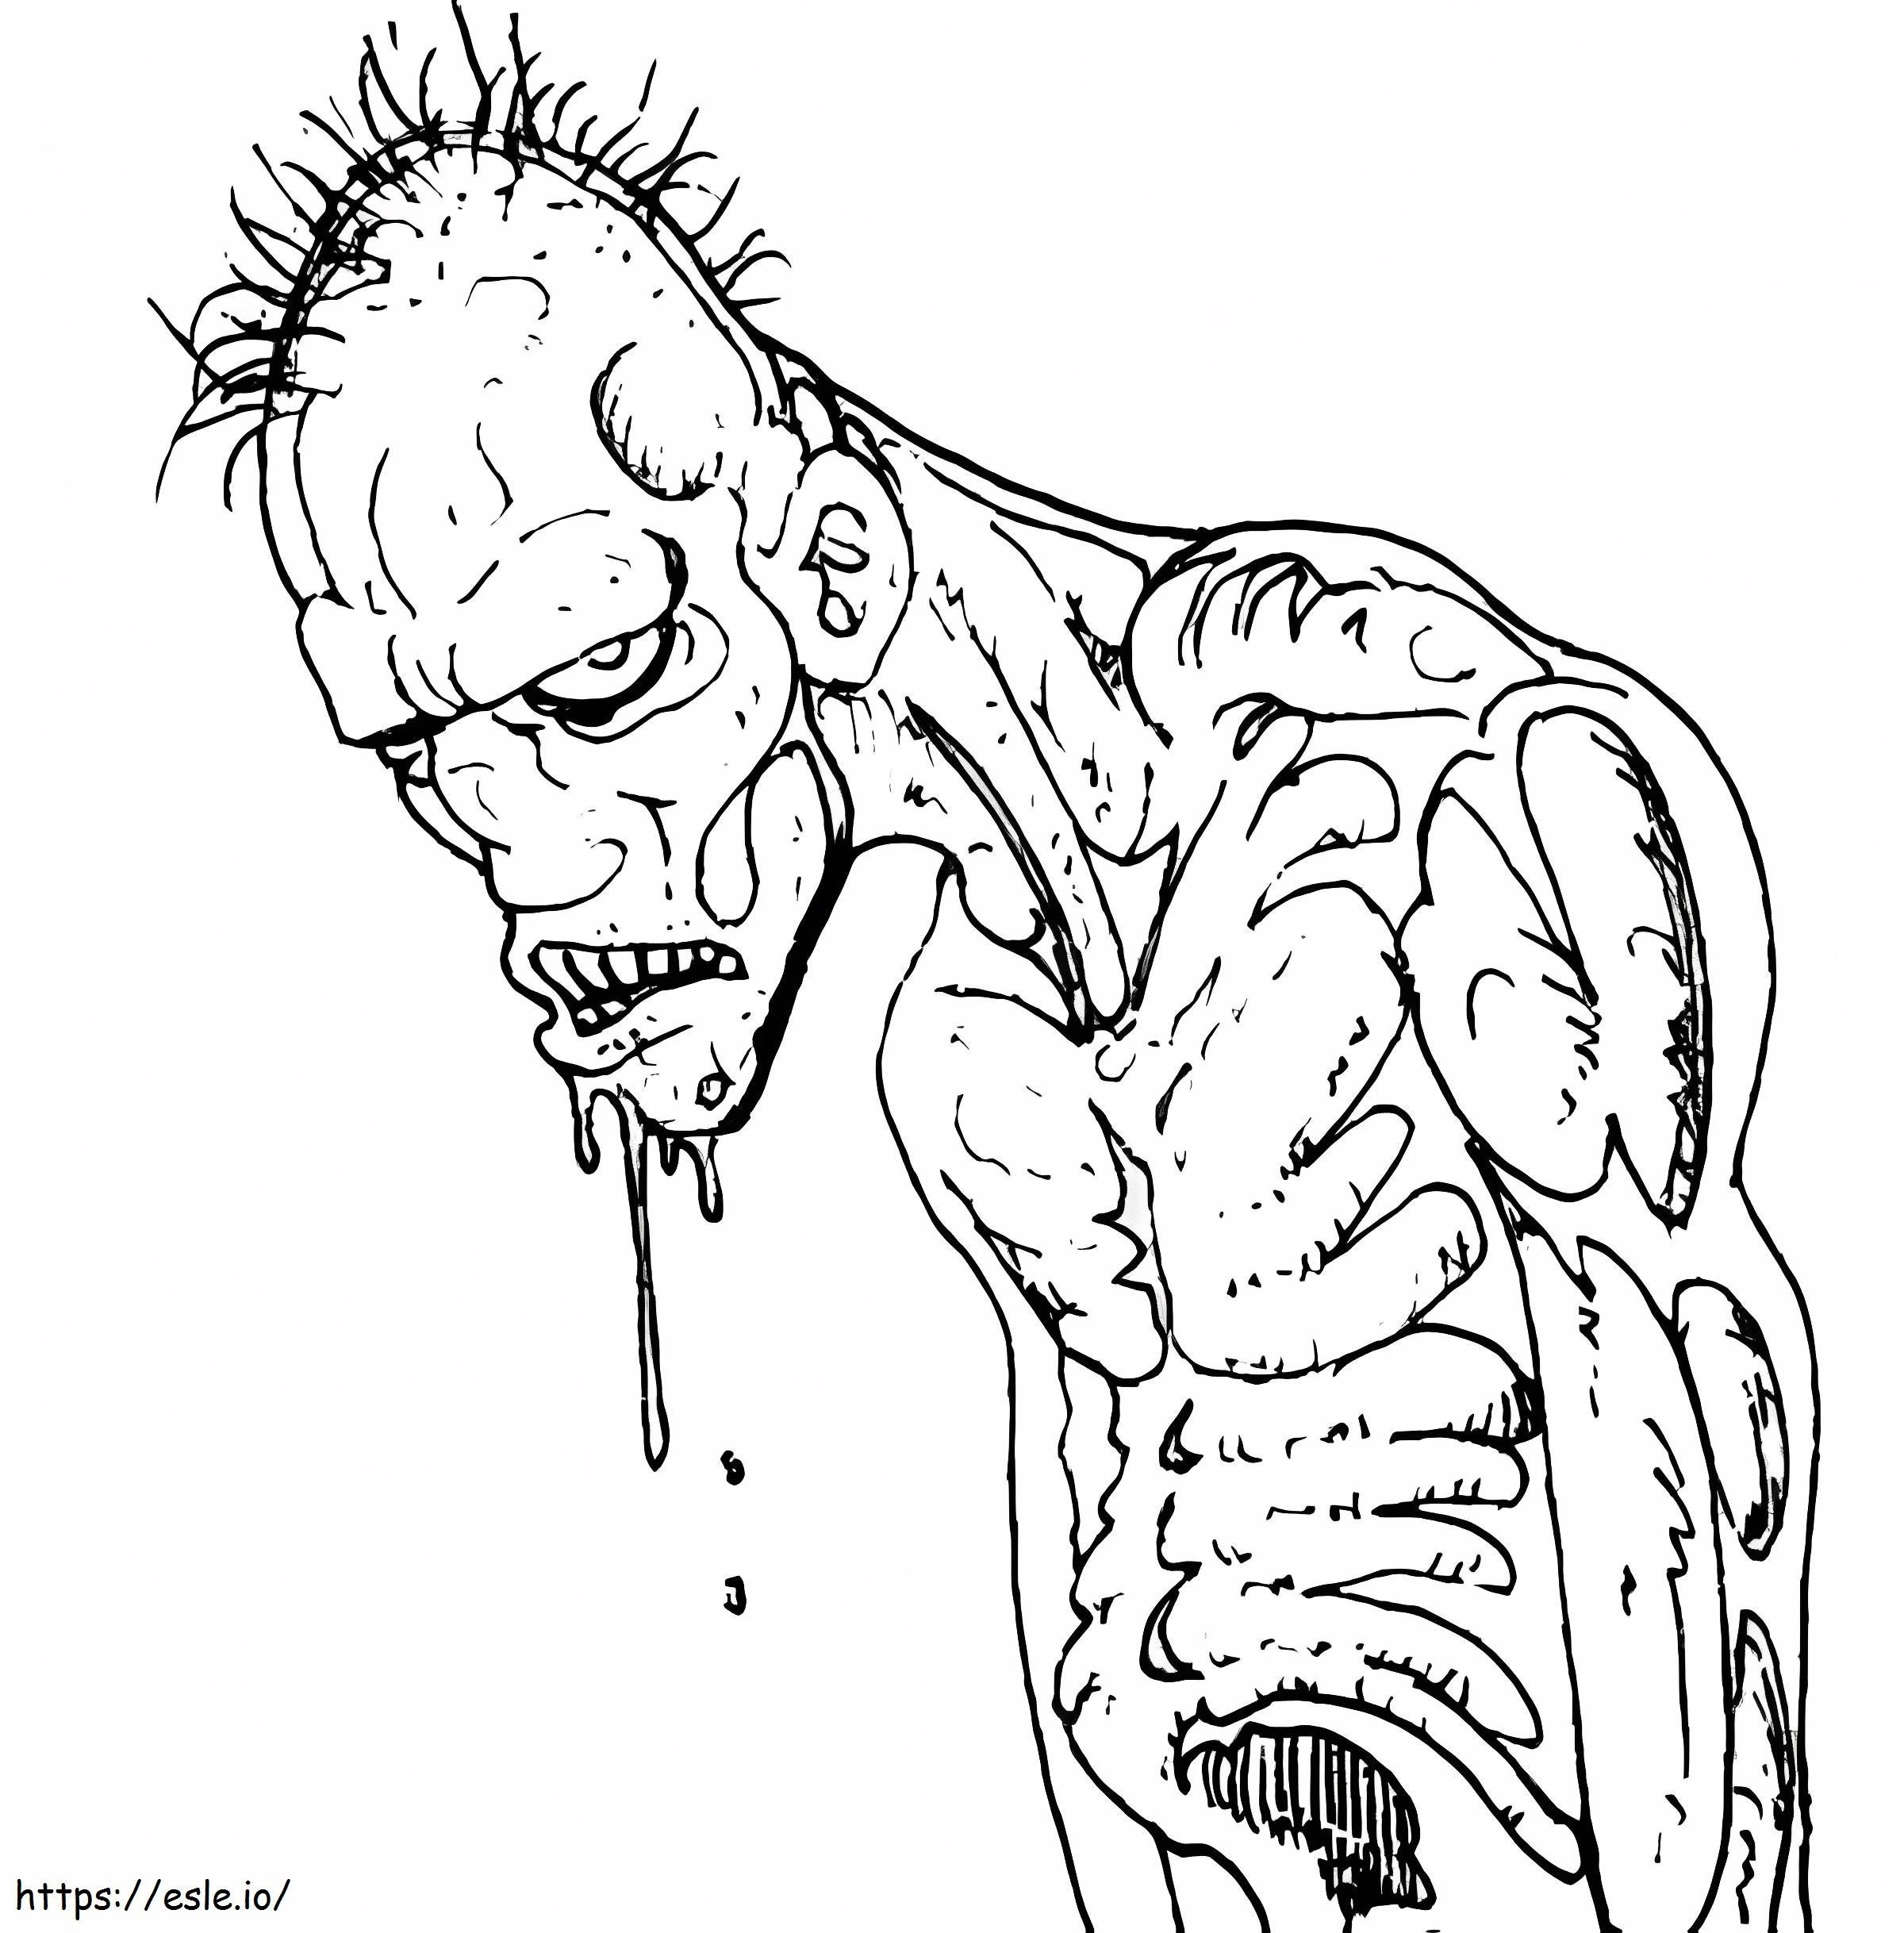 Undead Face coloring page